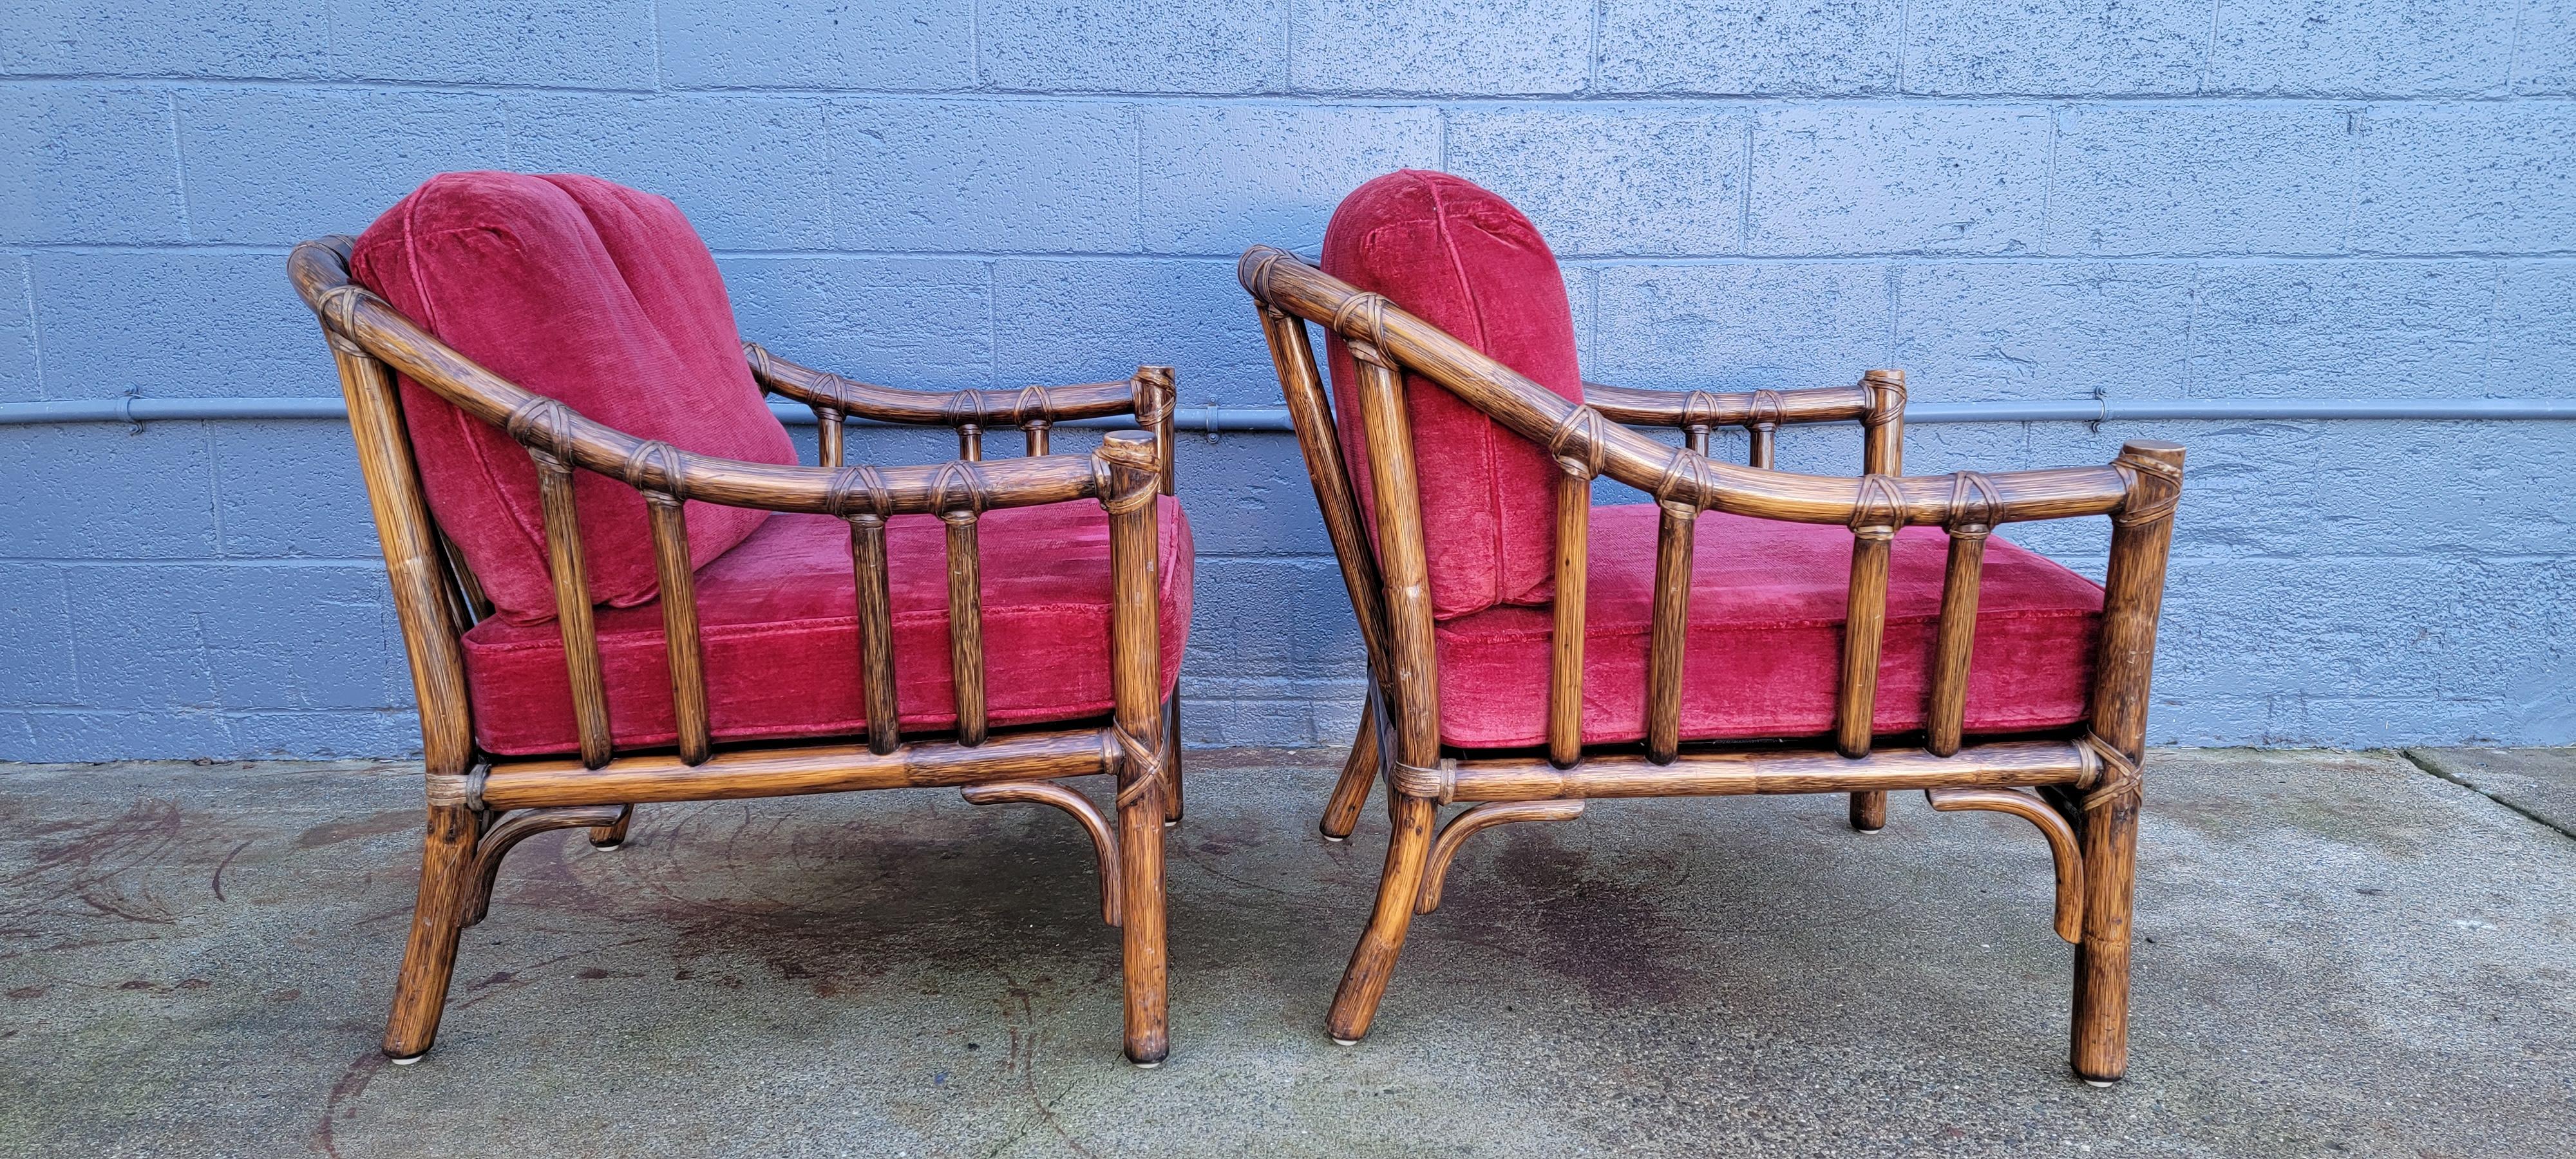 A fine pair of bamboo lounge chairs by McGuire Furniture of San Francisco, California. Quality crafted with leather bindings. Retain brass 